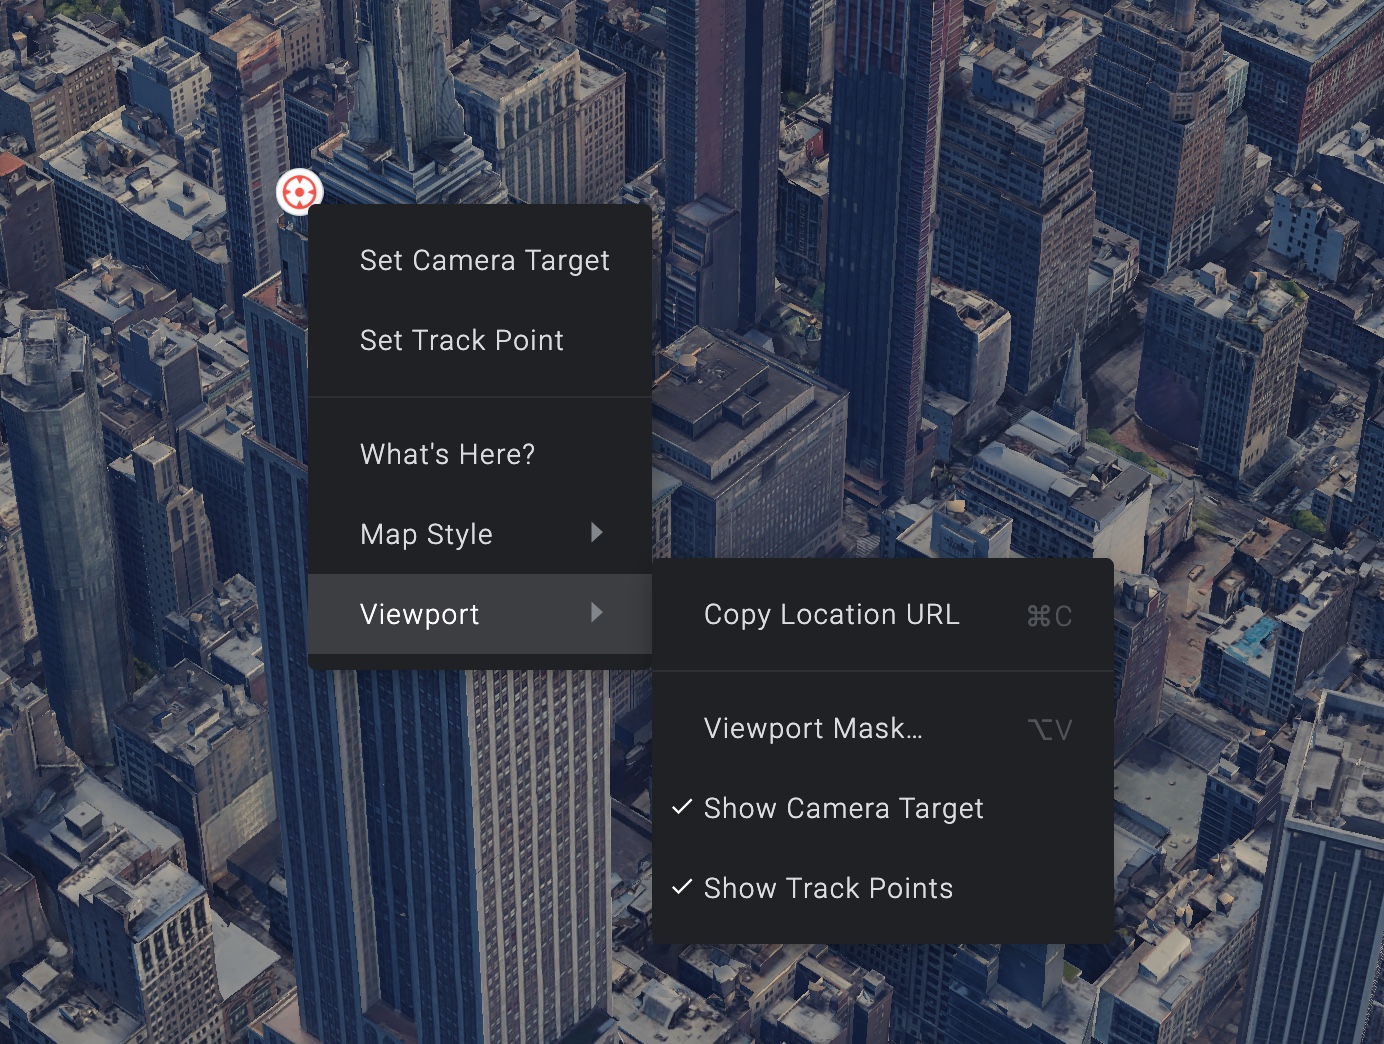 Right click menu to toggle the visibility of the camera target